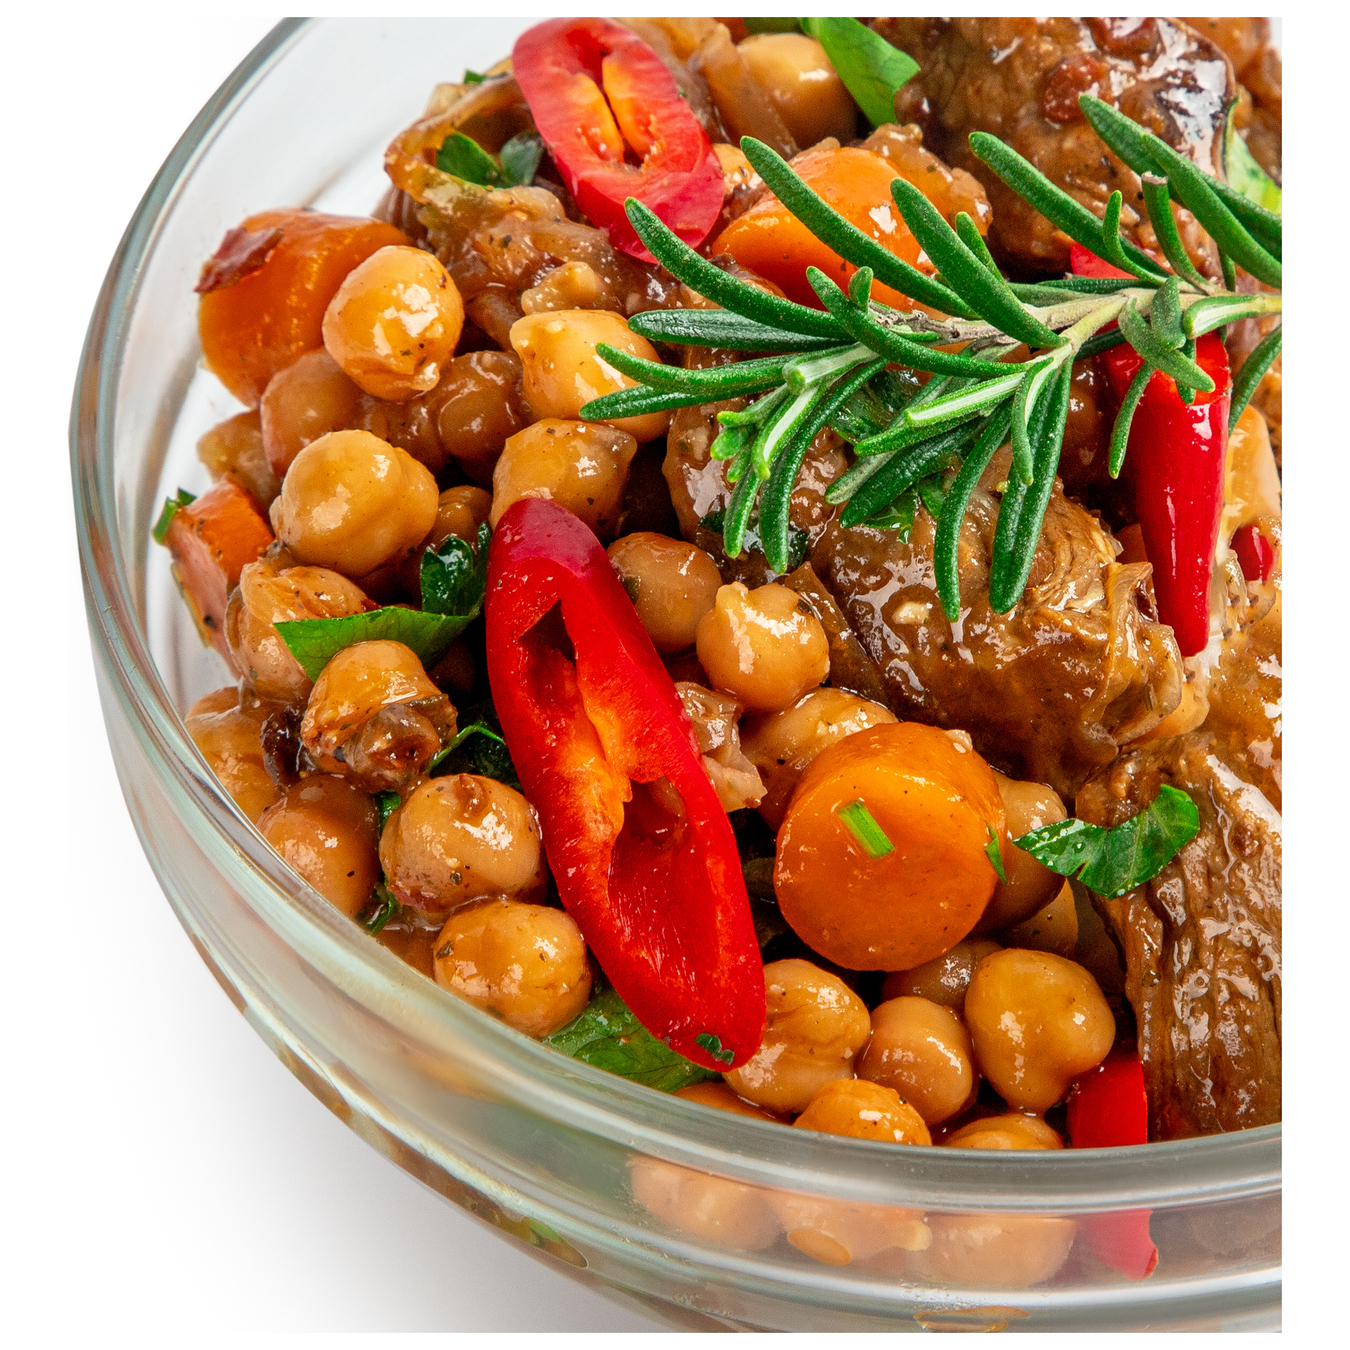 Chickpeas with beef and vegetables